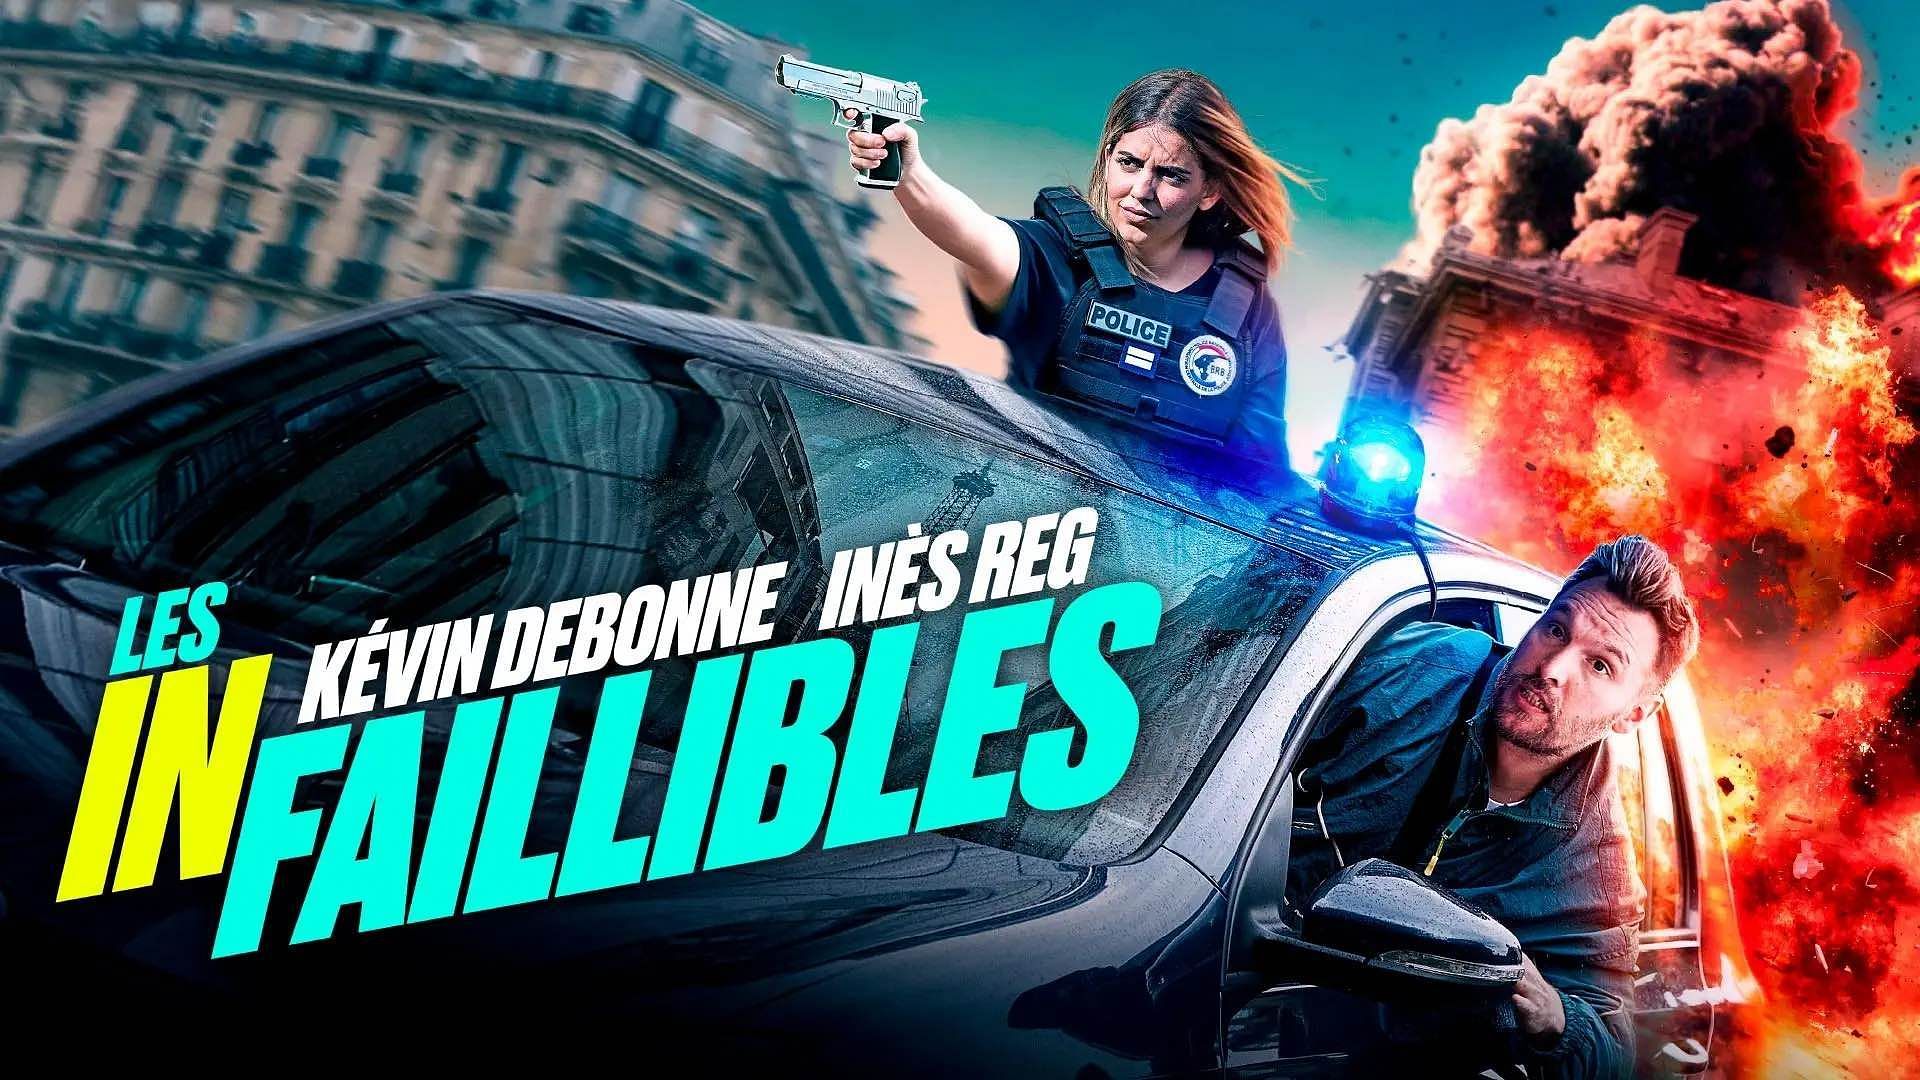 The Infallibles streaming on Prime Video (Image via Prime Video)